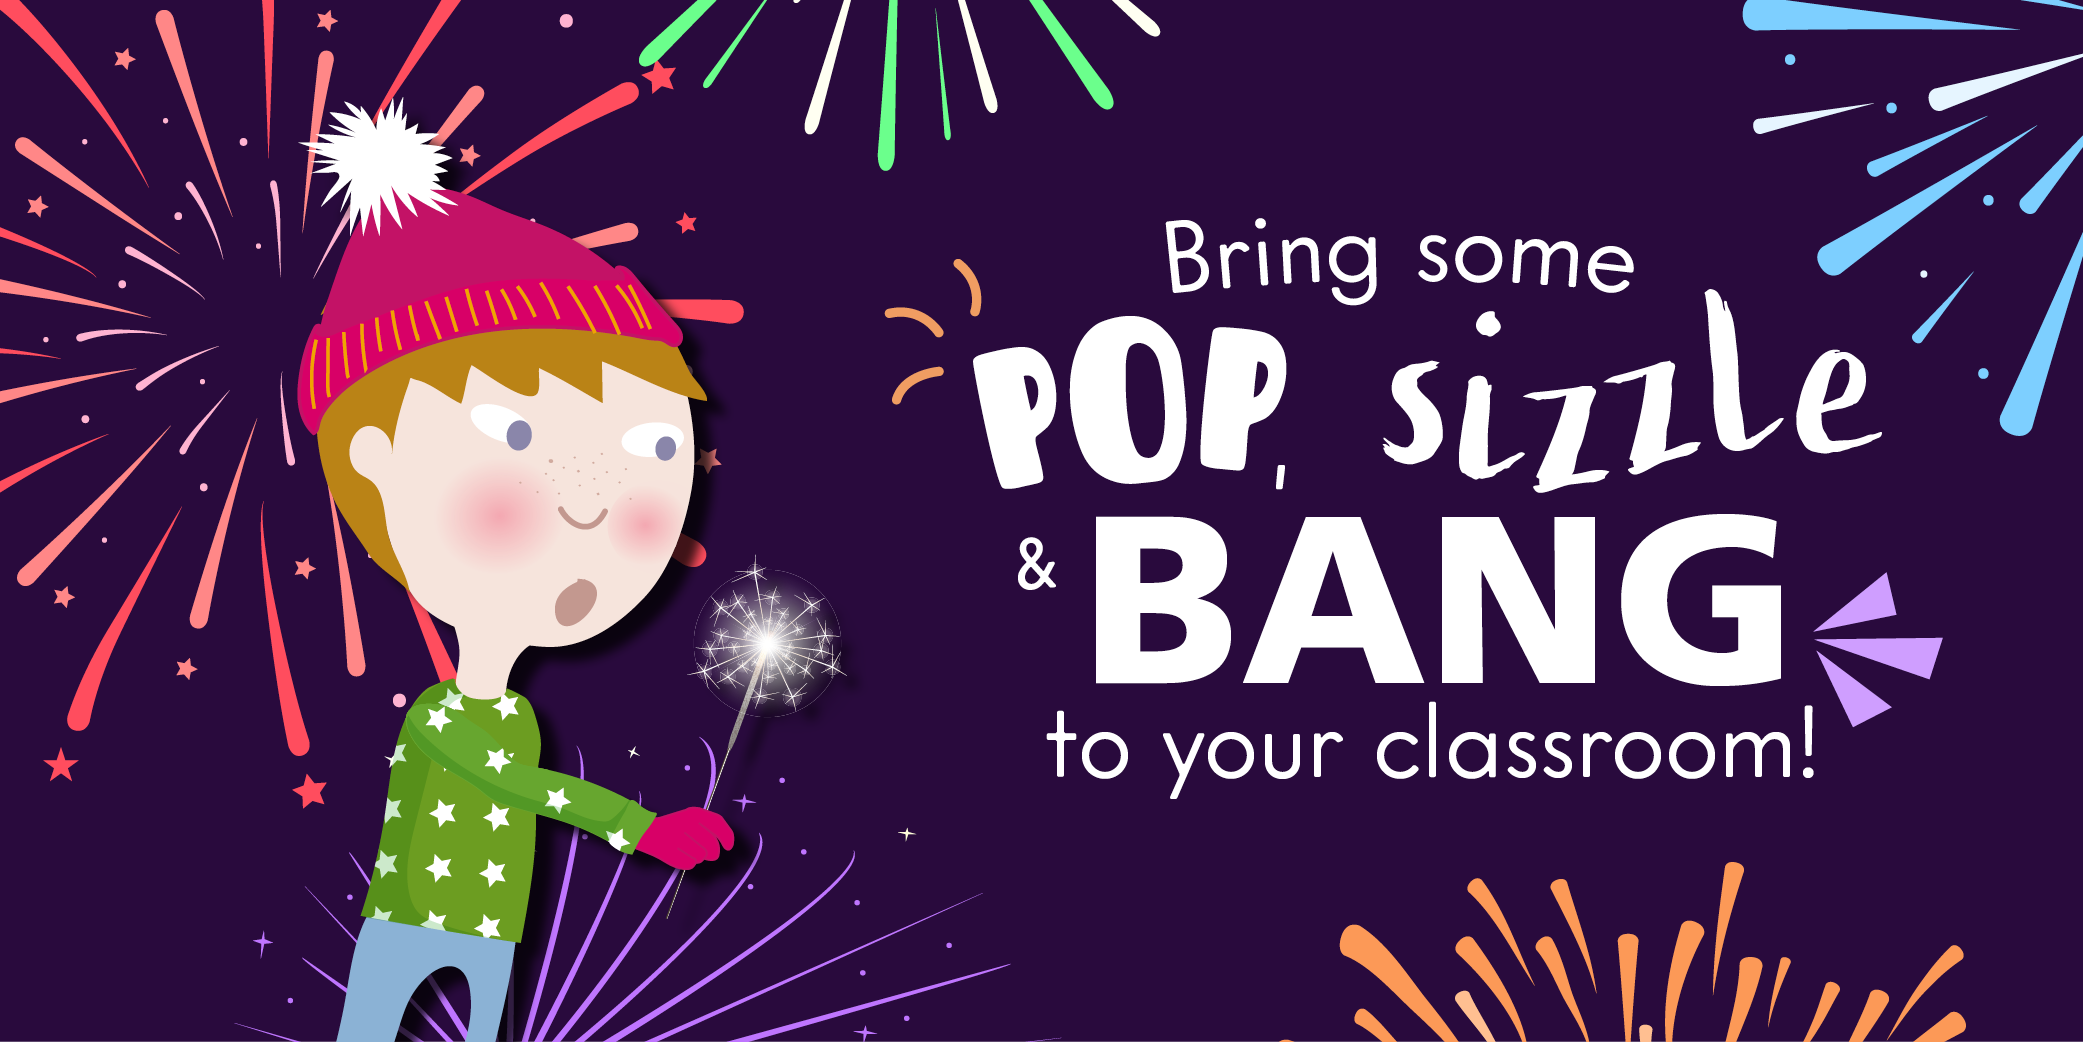 Bring Some Pop Sizzle And Bang To Your Classroom